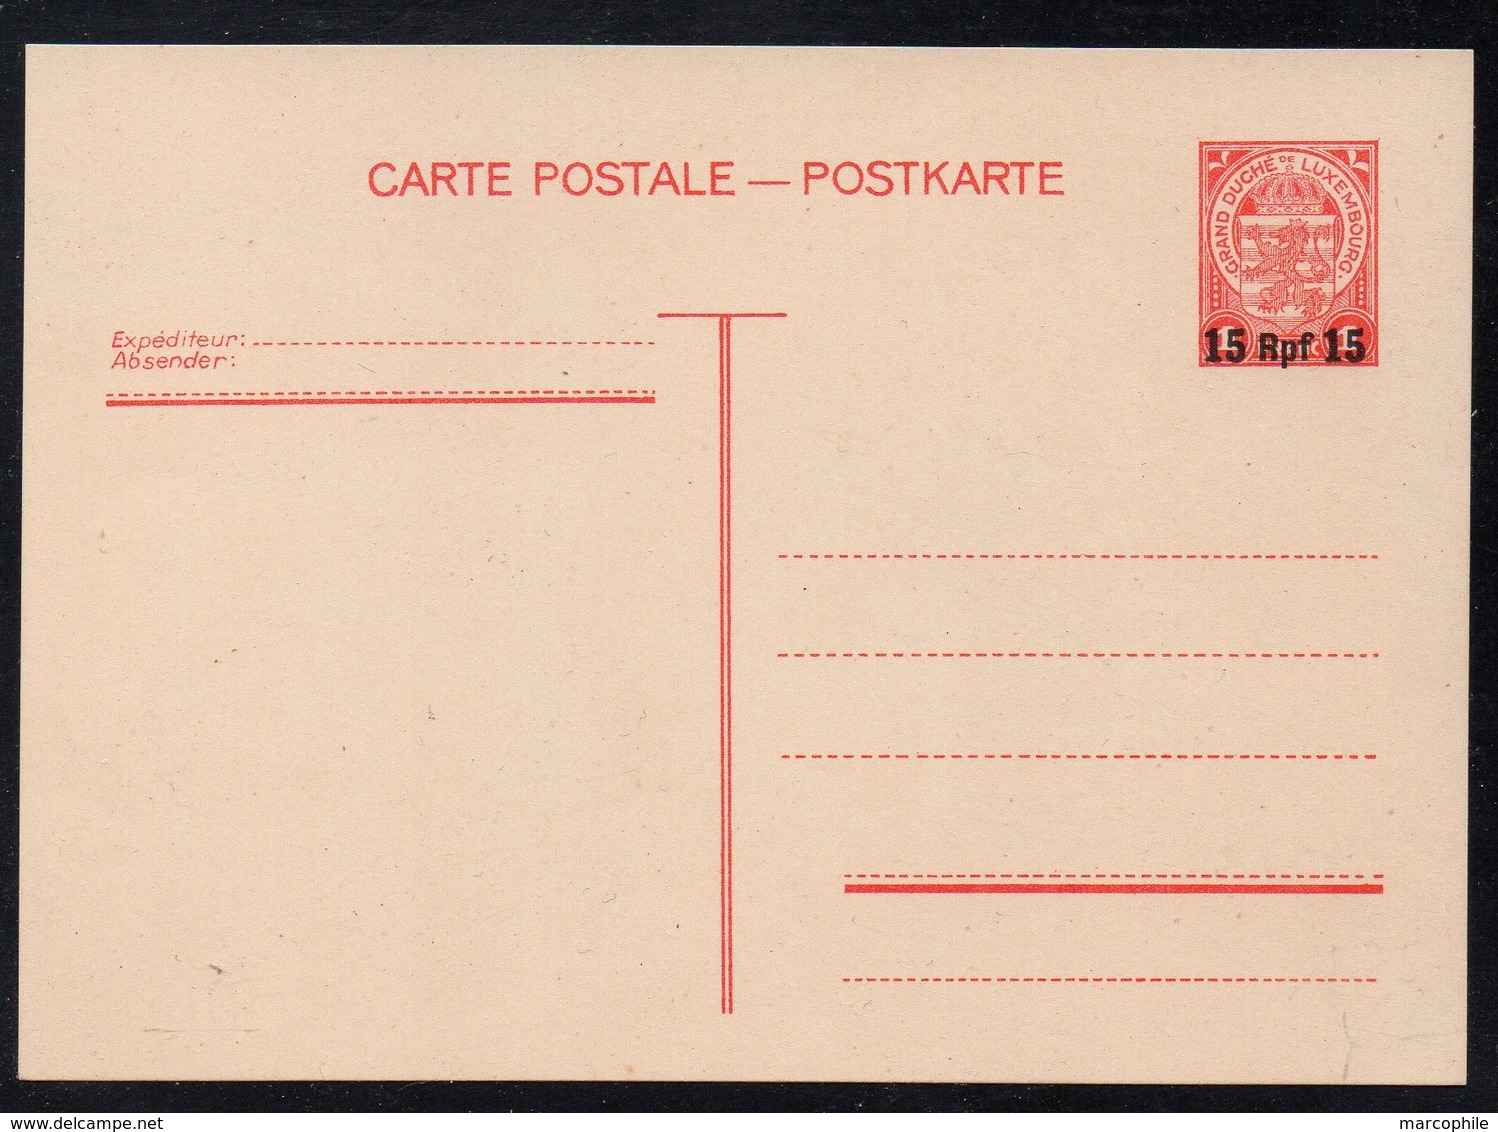 LUXEMBOURG / 1940 ENTIER POSTAL D'OCCUPATION SURCHARGE 15 PF/1F. (ref LE3523) - 1940-1944 German Occupation